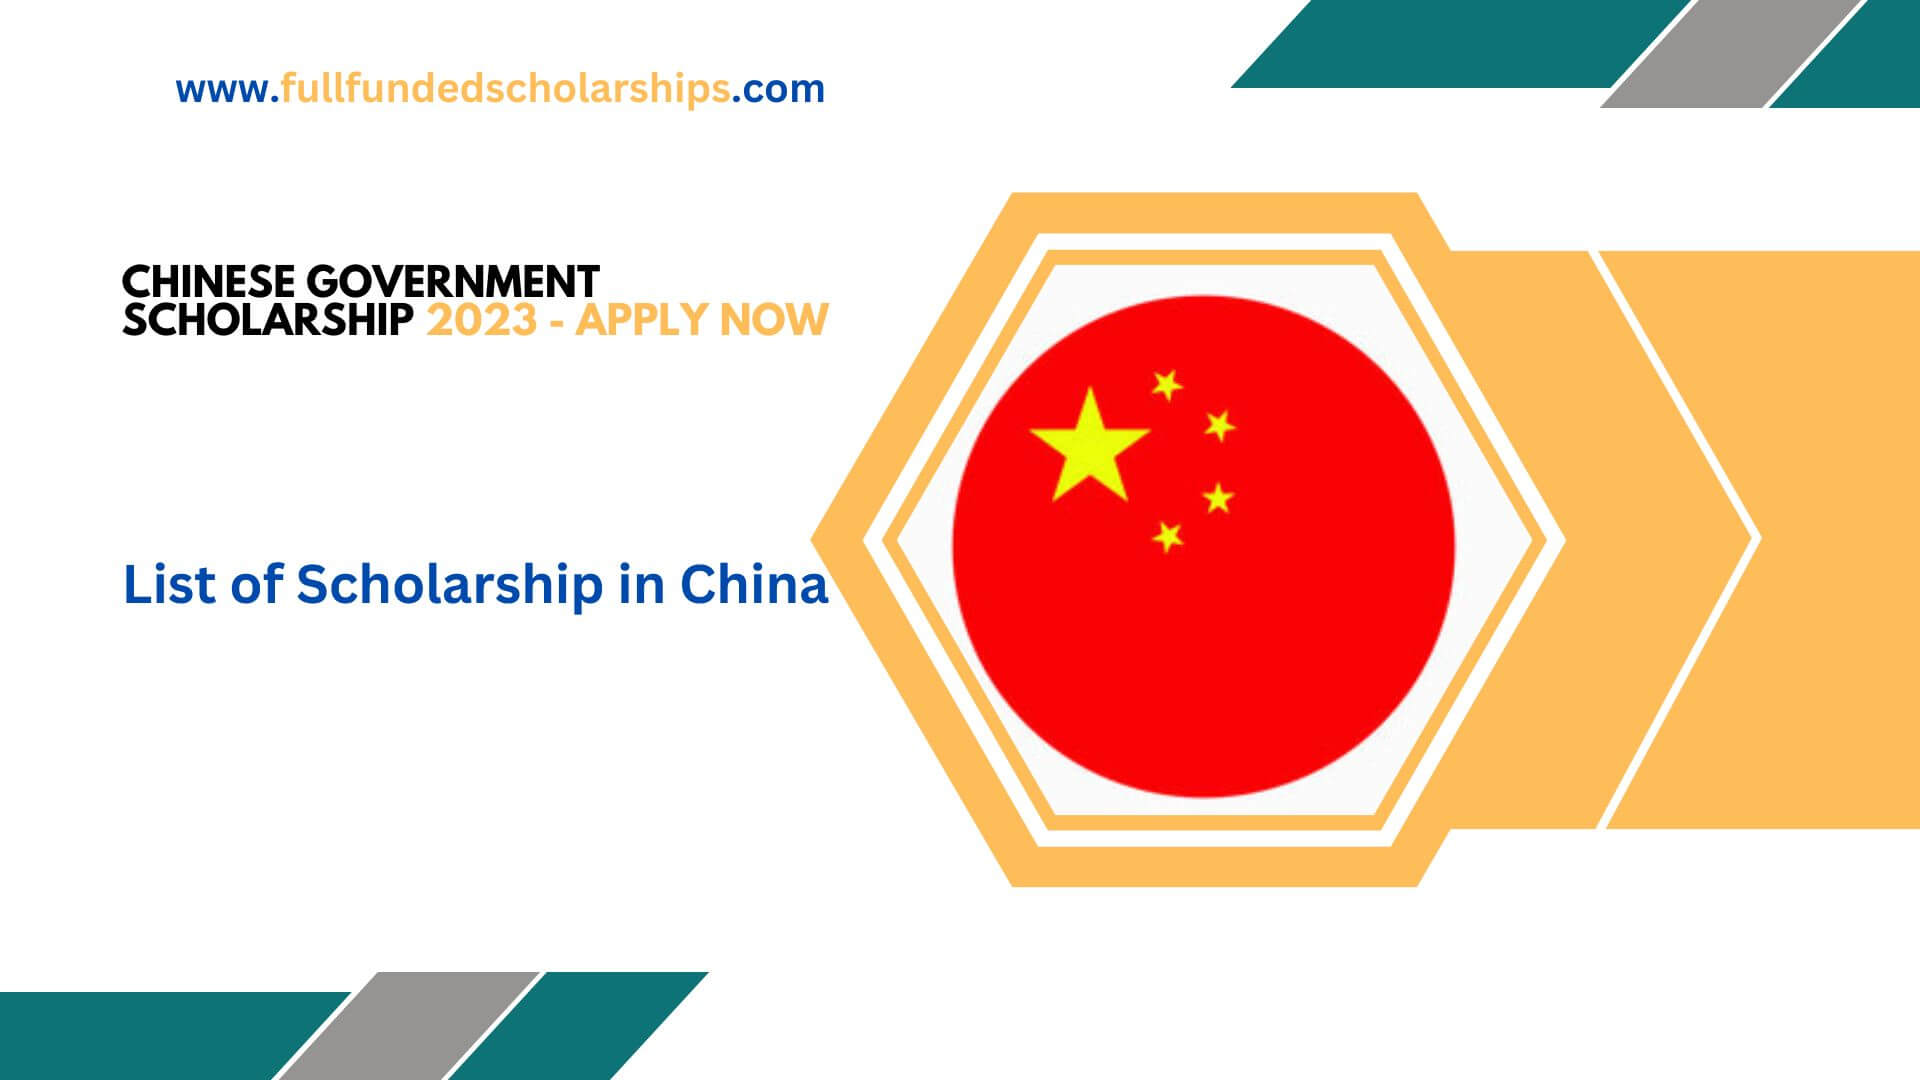 Chinese Government Scholarship 2023 - Apply Now